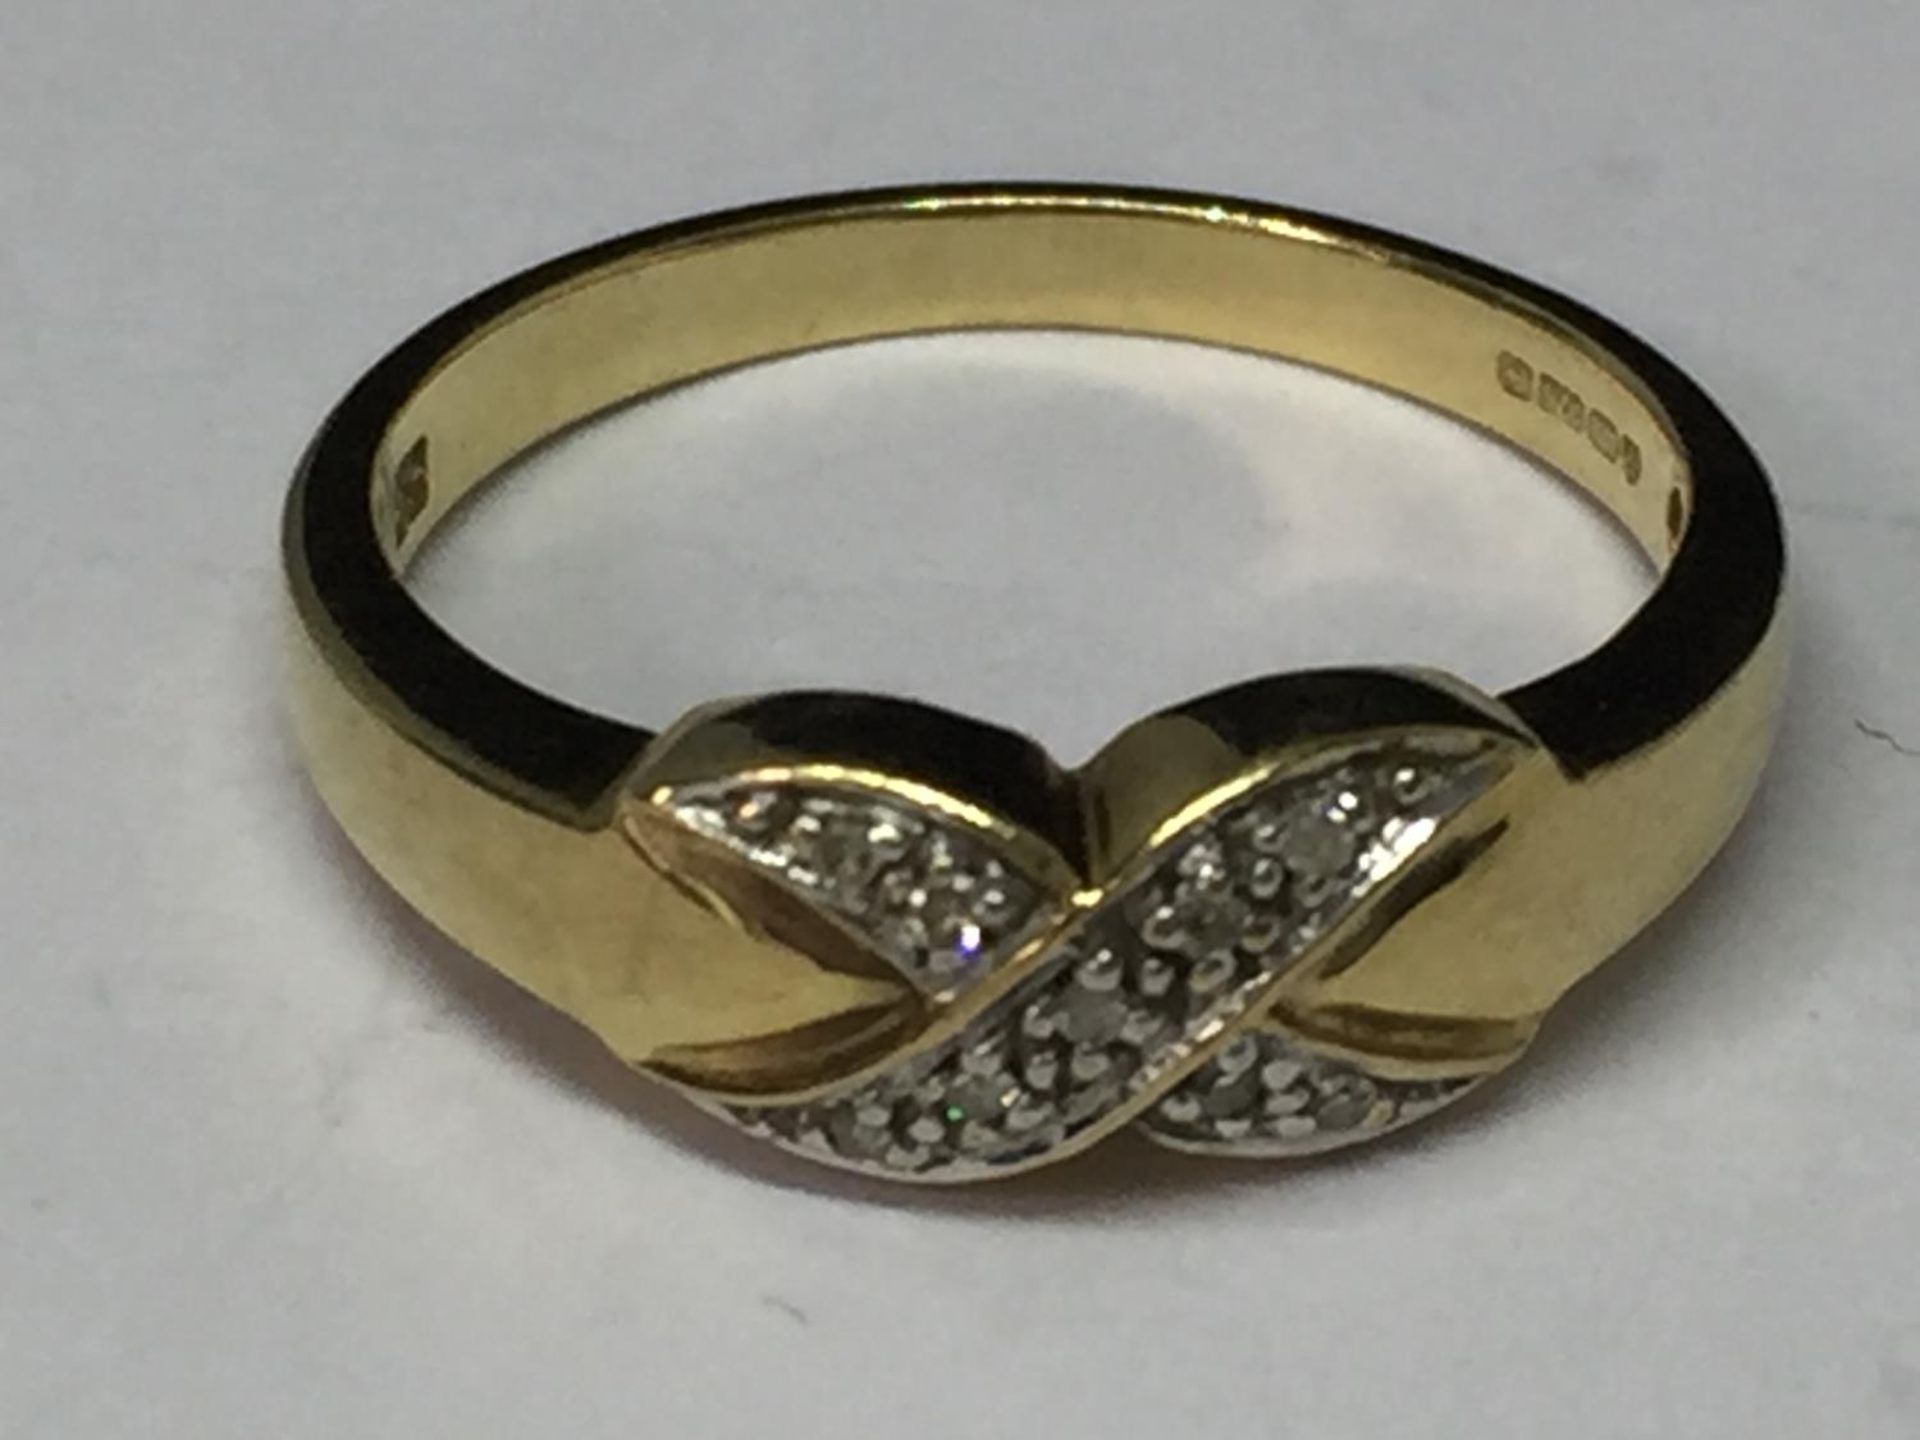 A 9 CARAT GOLD RING WITH DIAMONDS IN A CROSS DESIGN SIZE M/N